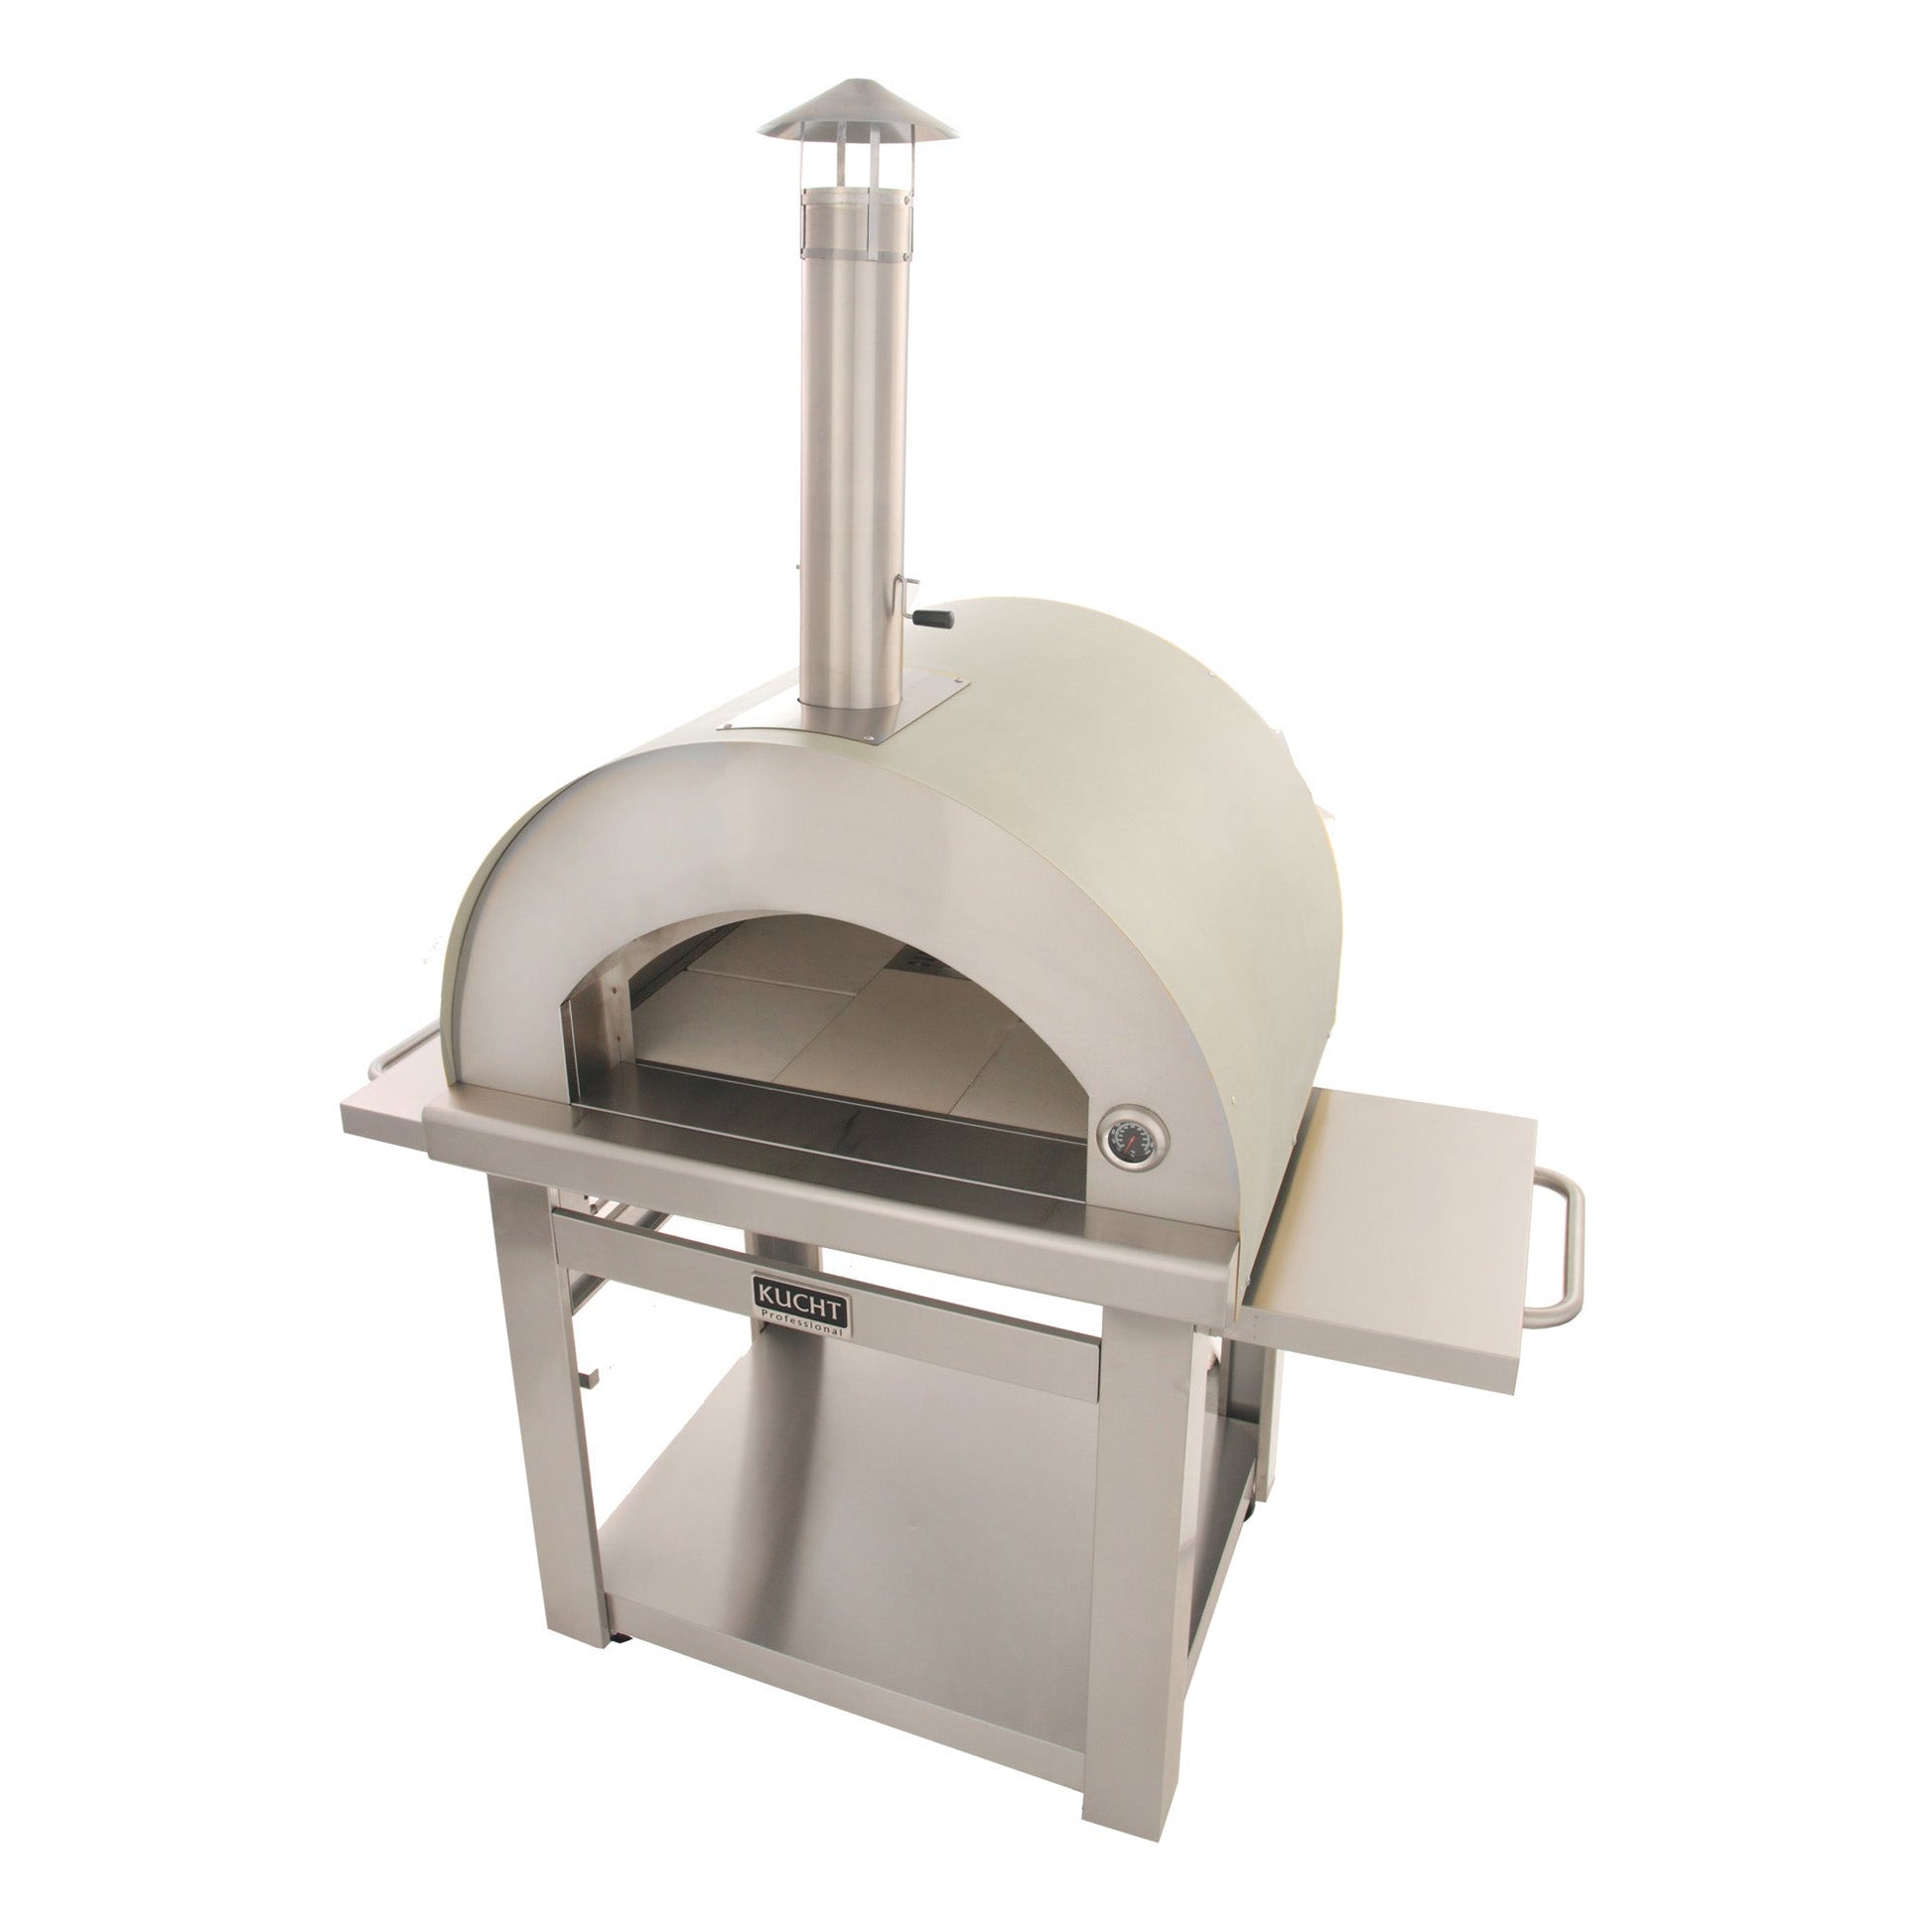 Kucht Venice Stainless Steel Outdoor Pizza Oven With All-Weather Cover